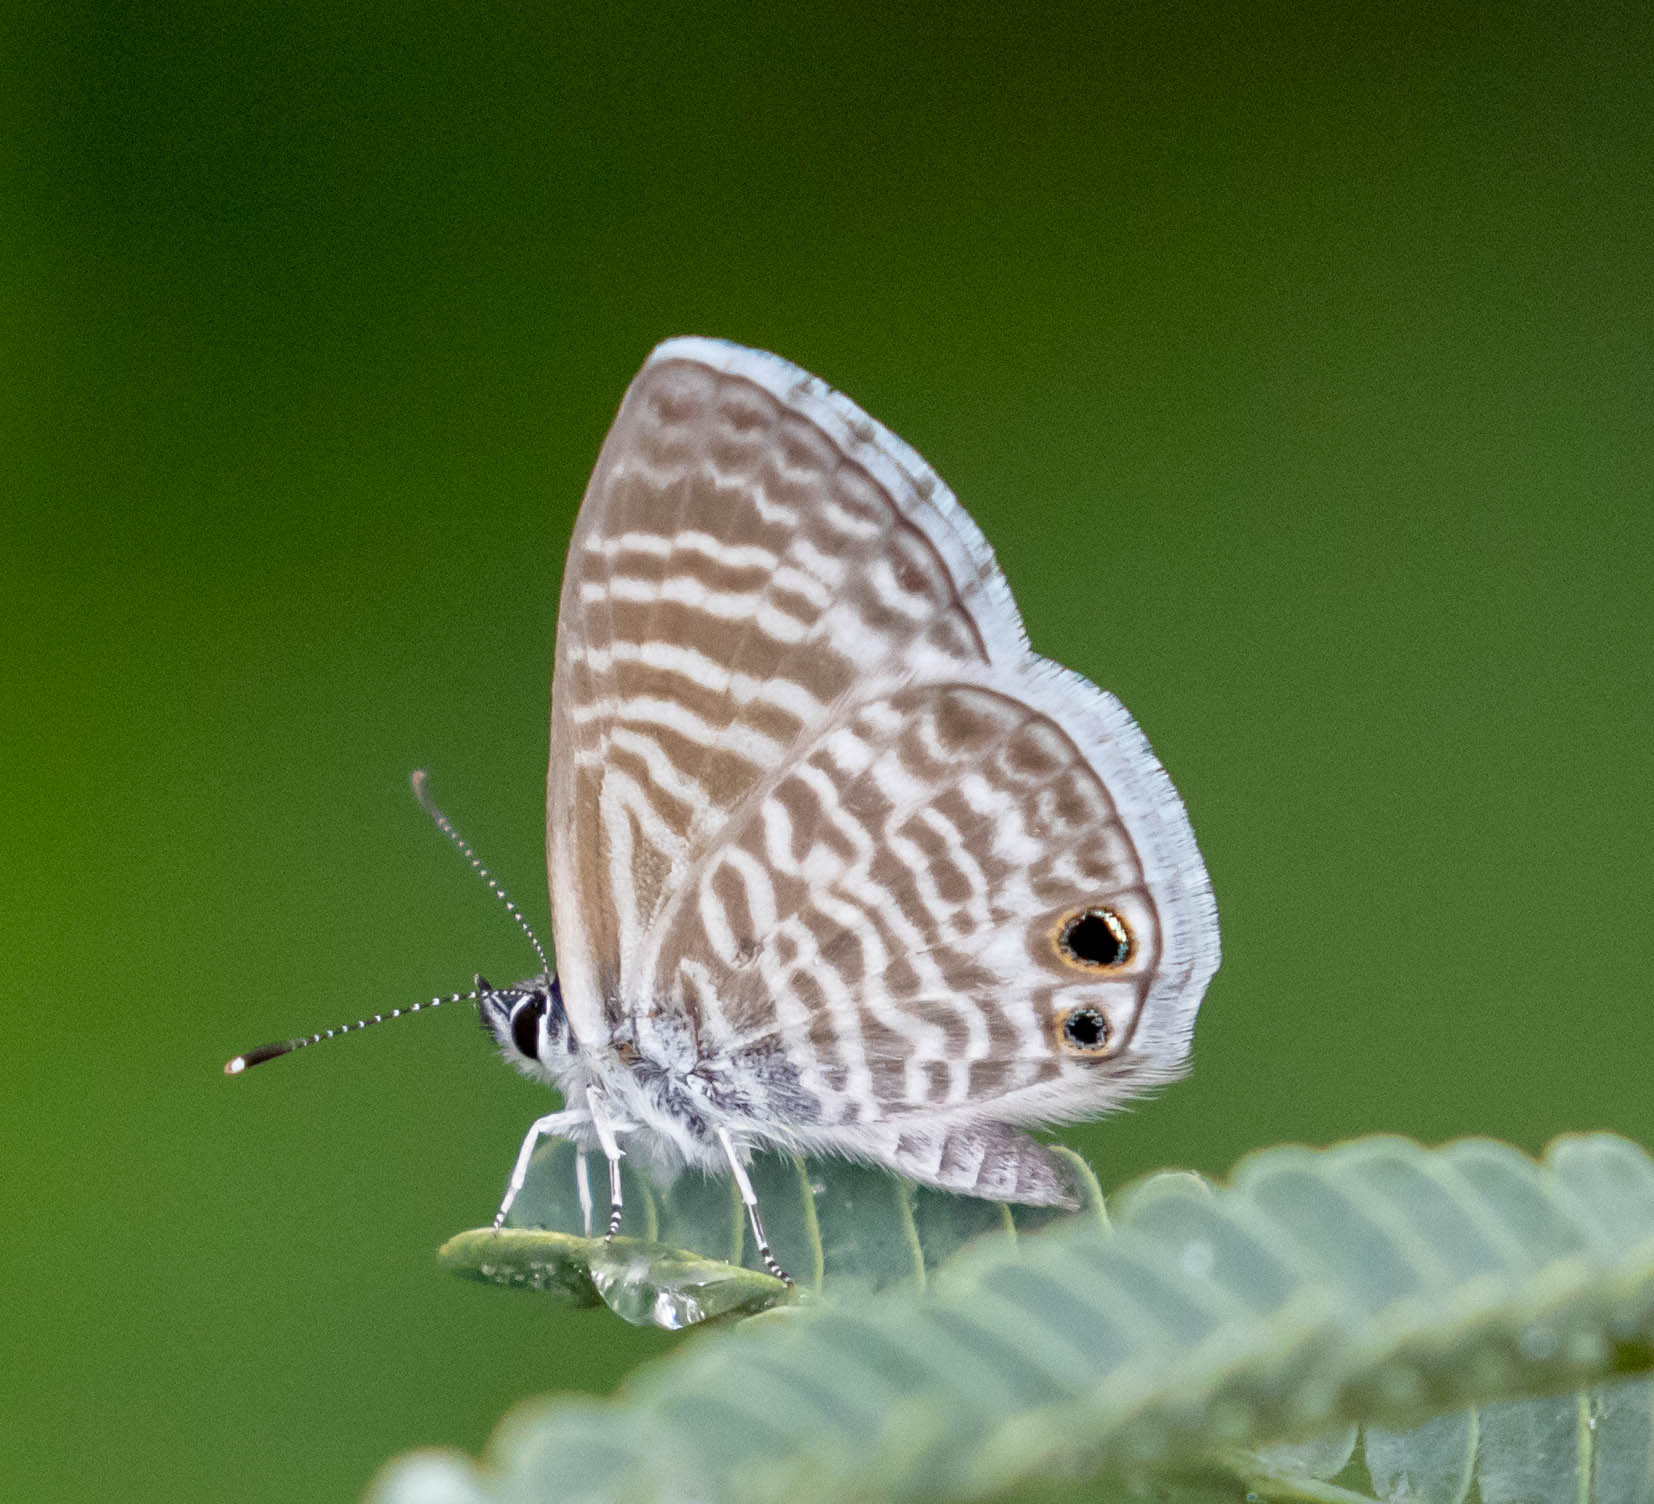 Marine Blue Leptotes marina (Reakirt, 1868) | Butterflies and Moths of  North America